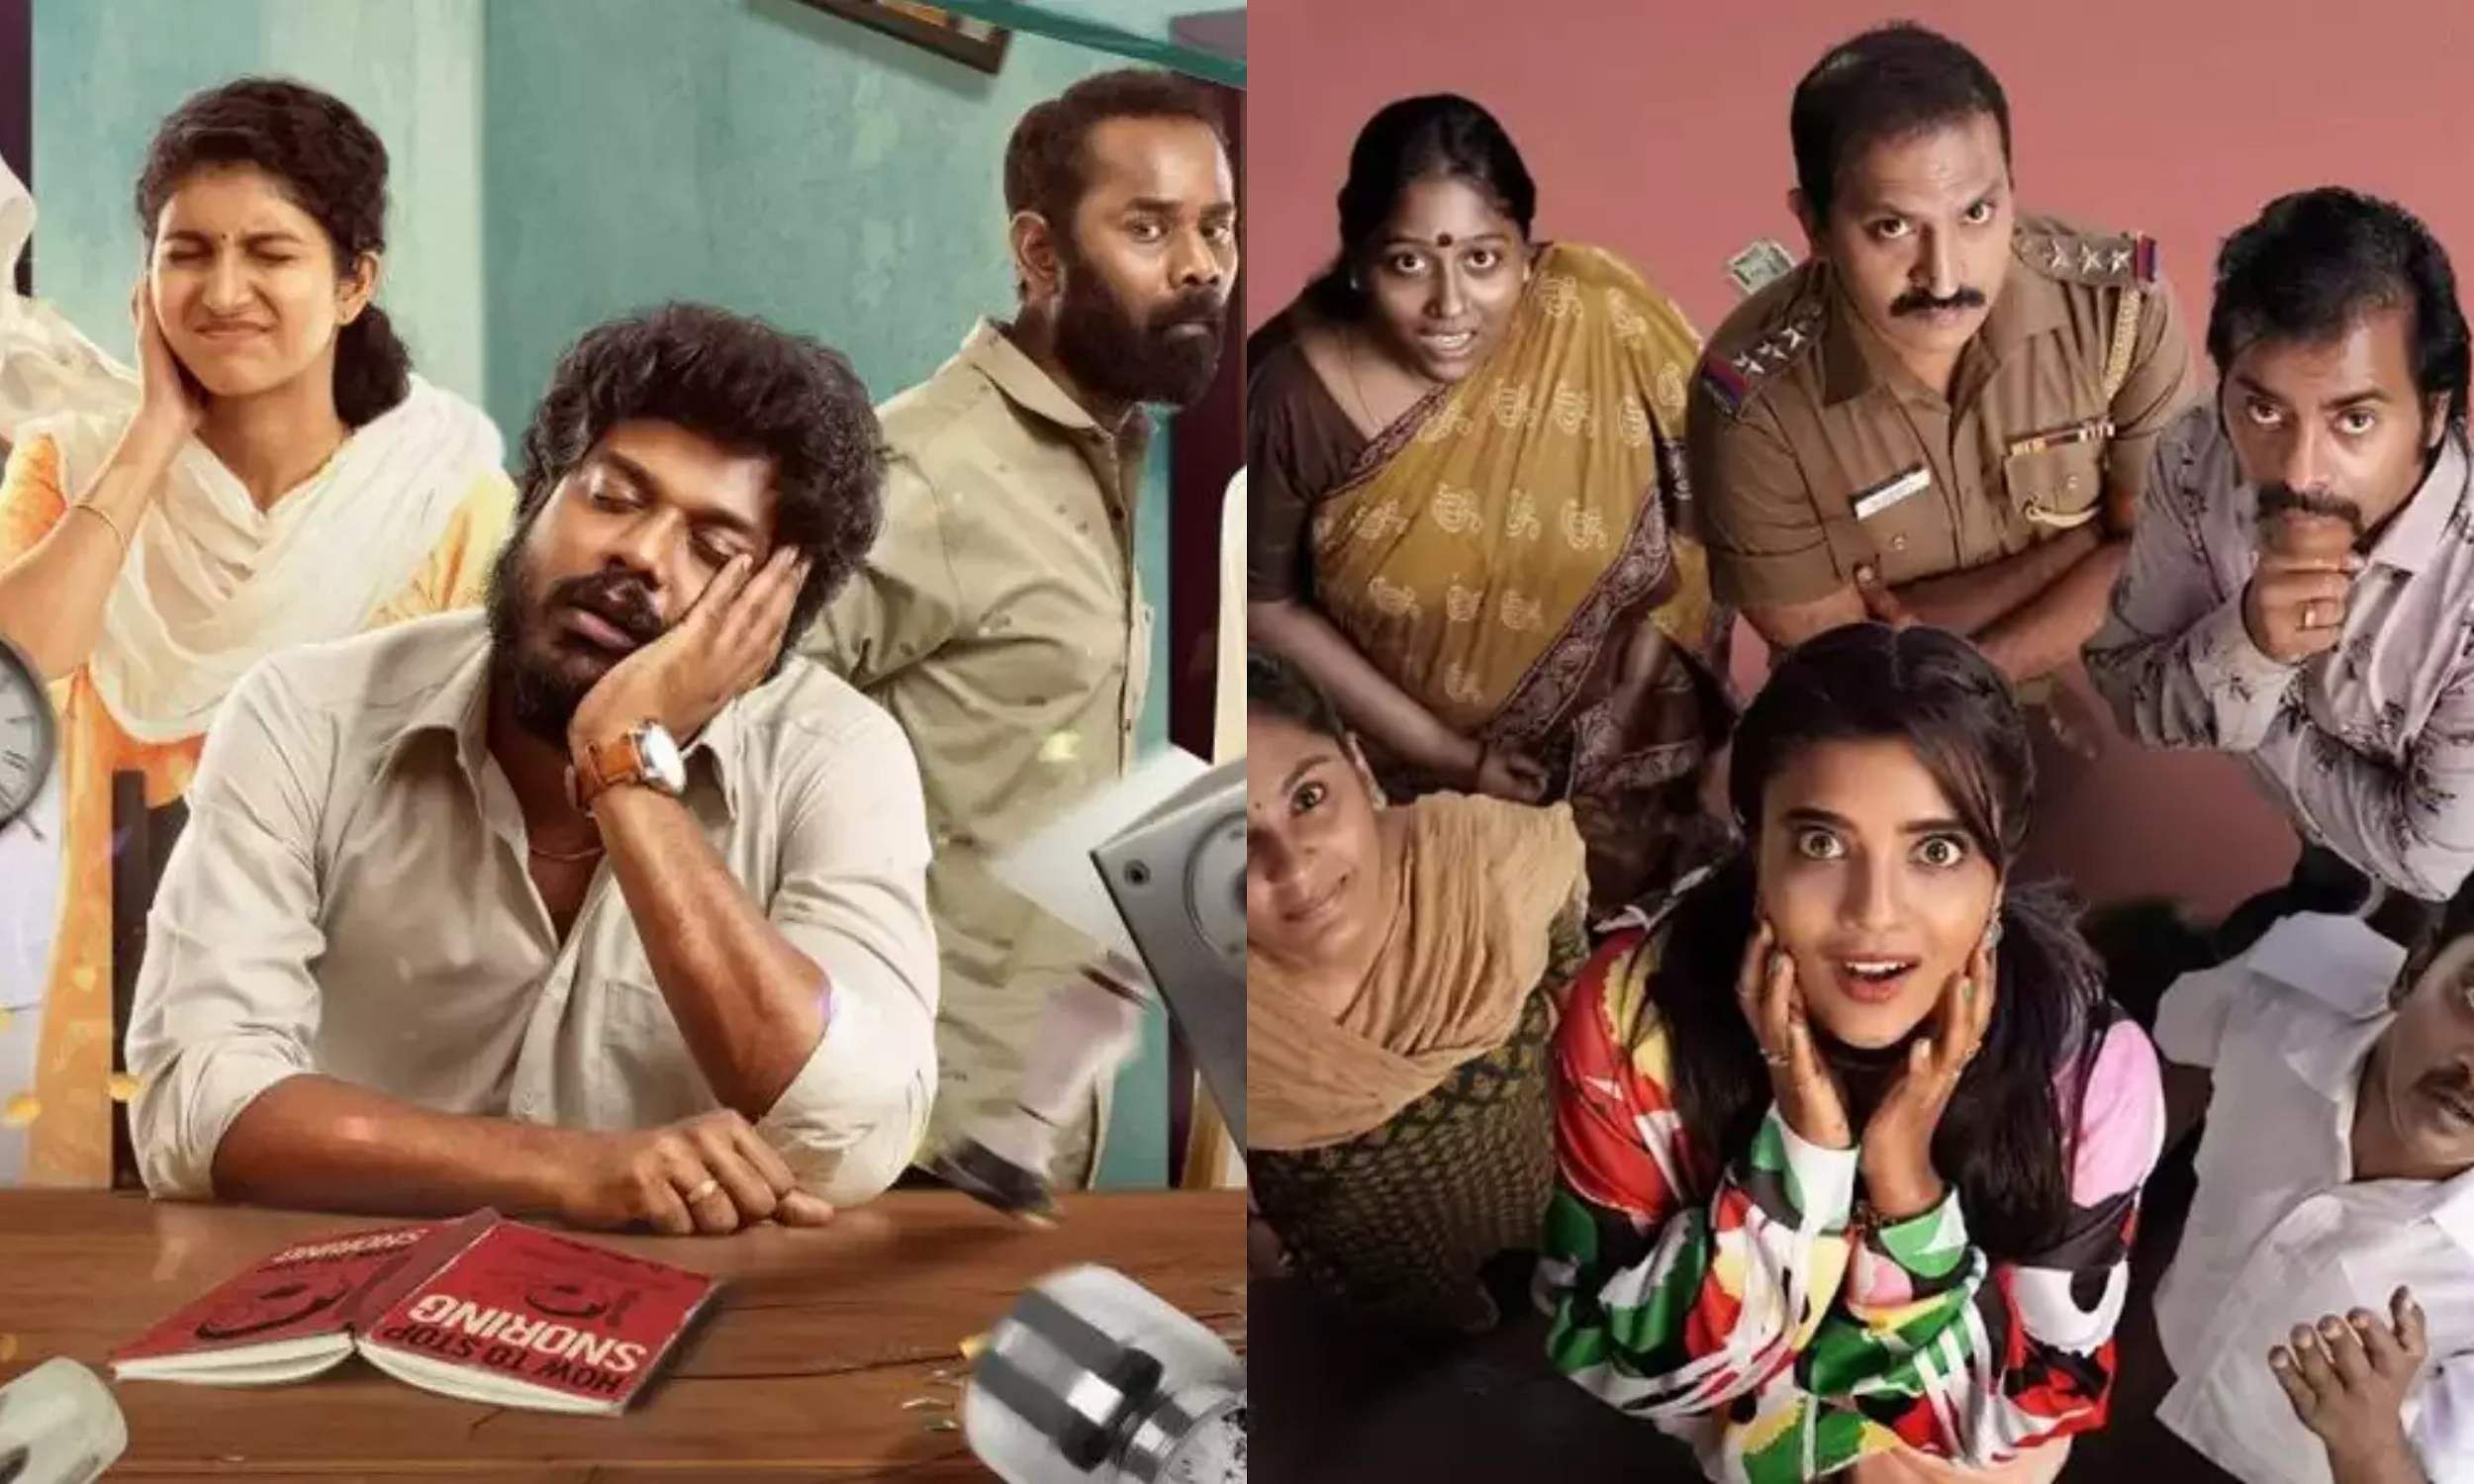 Disney+ Hotstar bags streaming rights of two Tamil films 